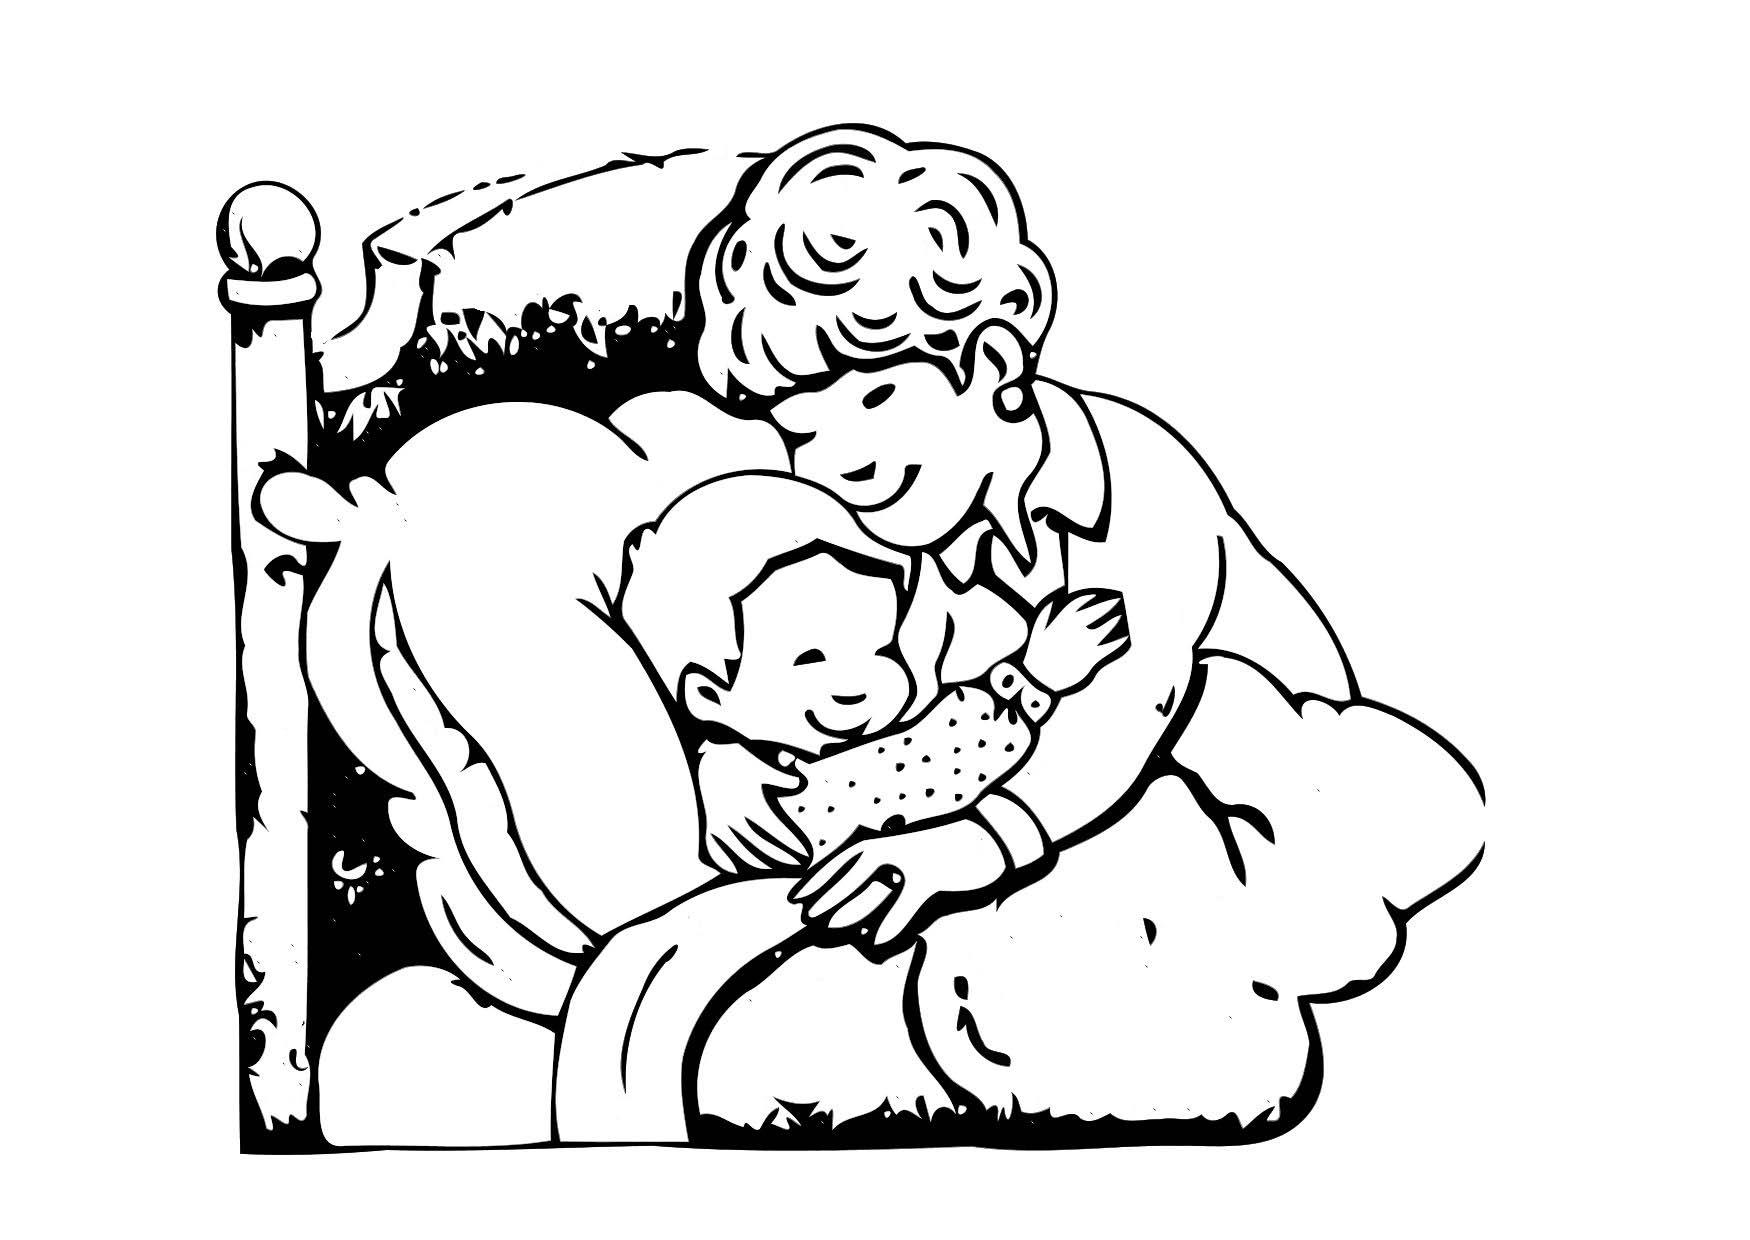 Coloring page right to care and love